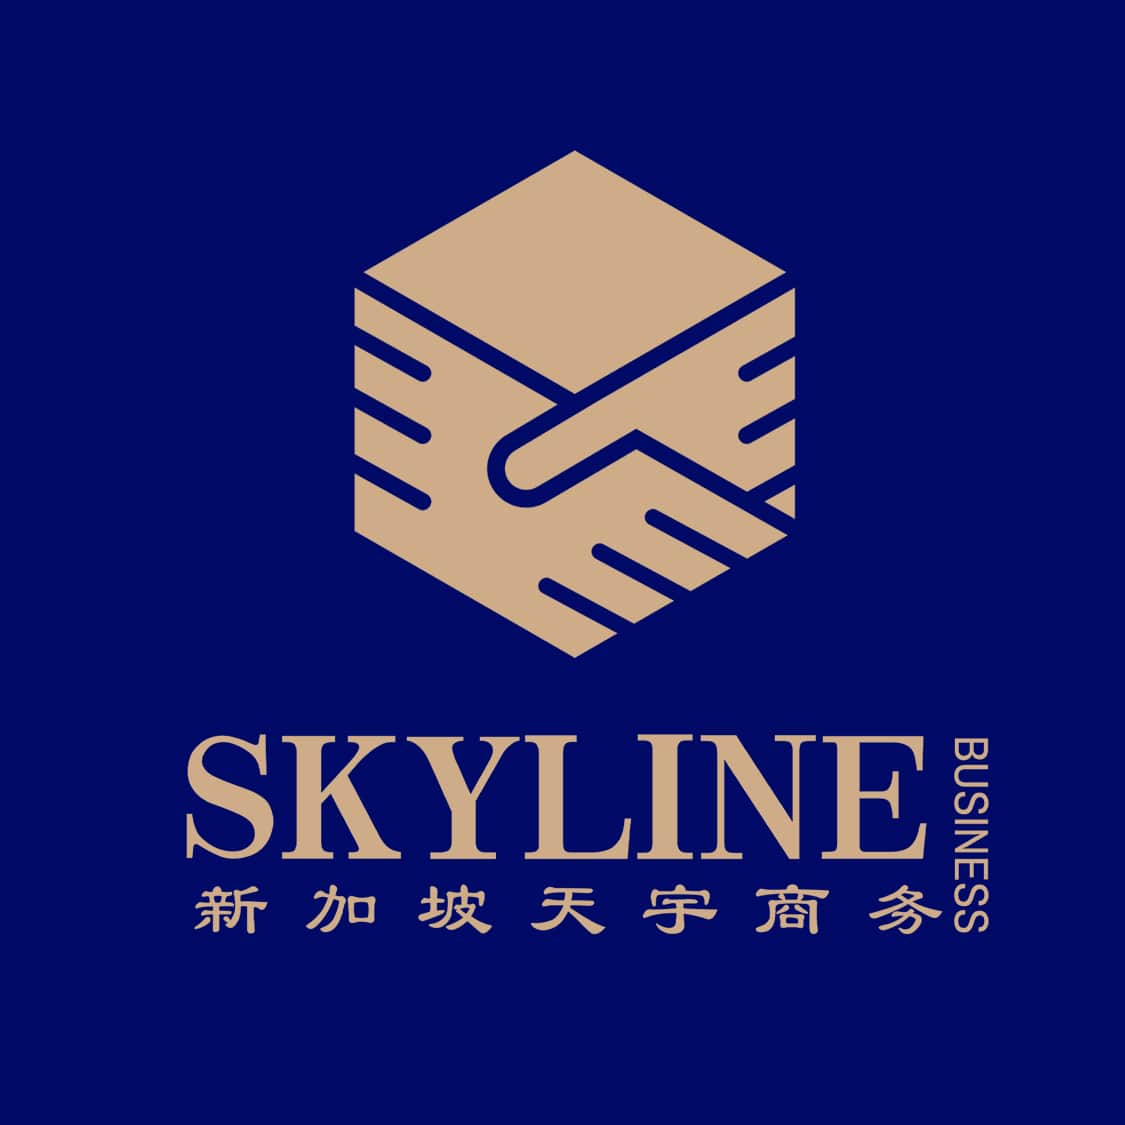 Company logo for Skyline Business Consulting Pte. Ltd.